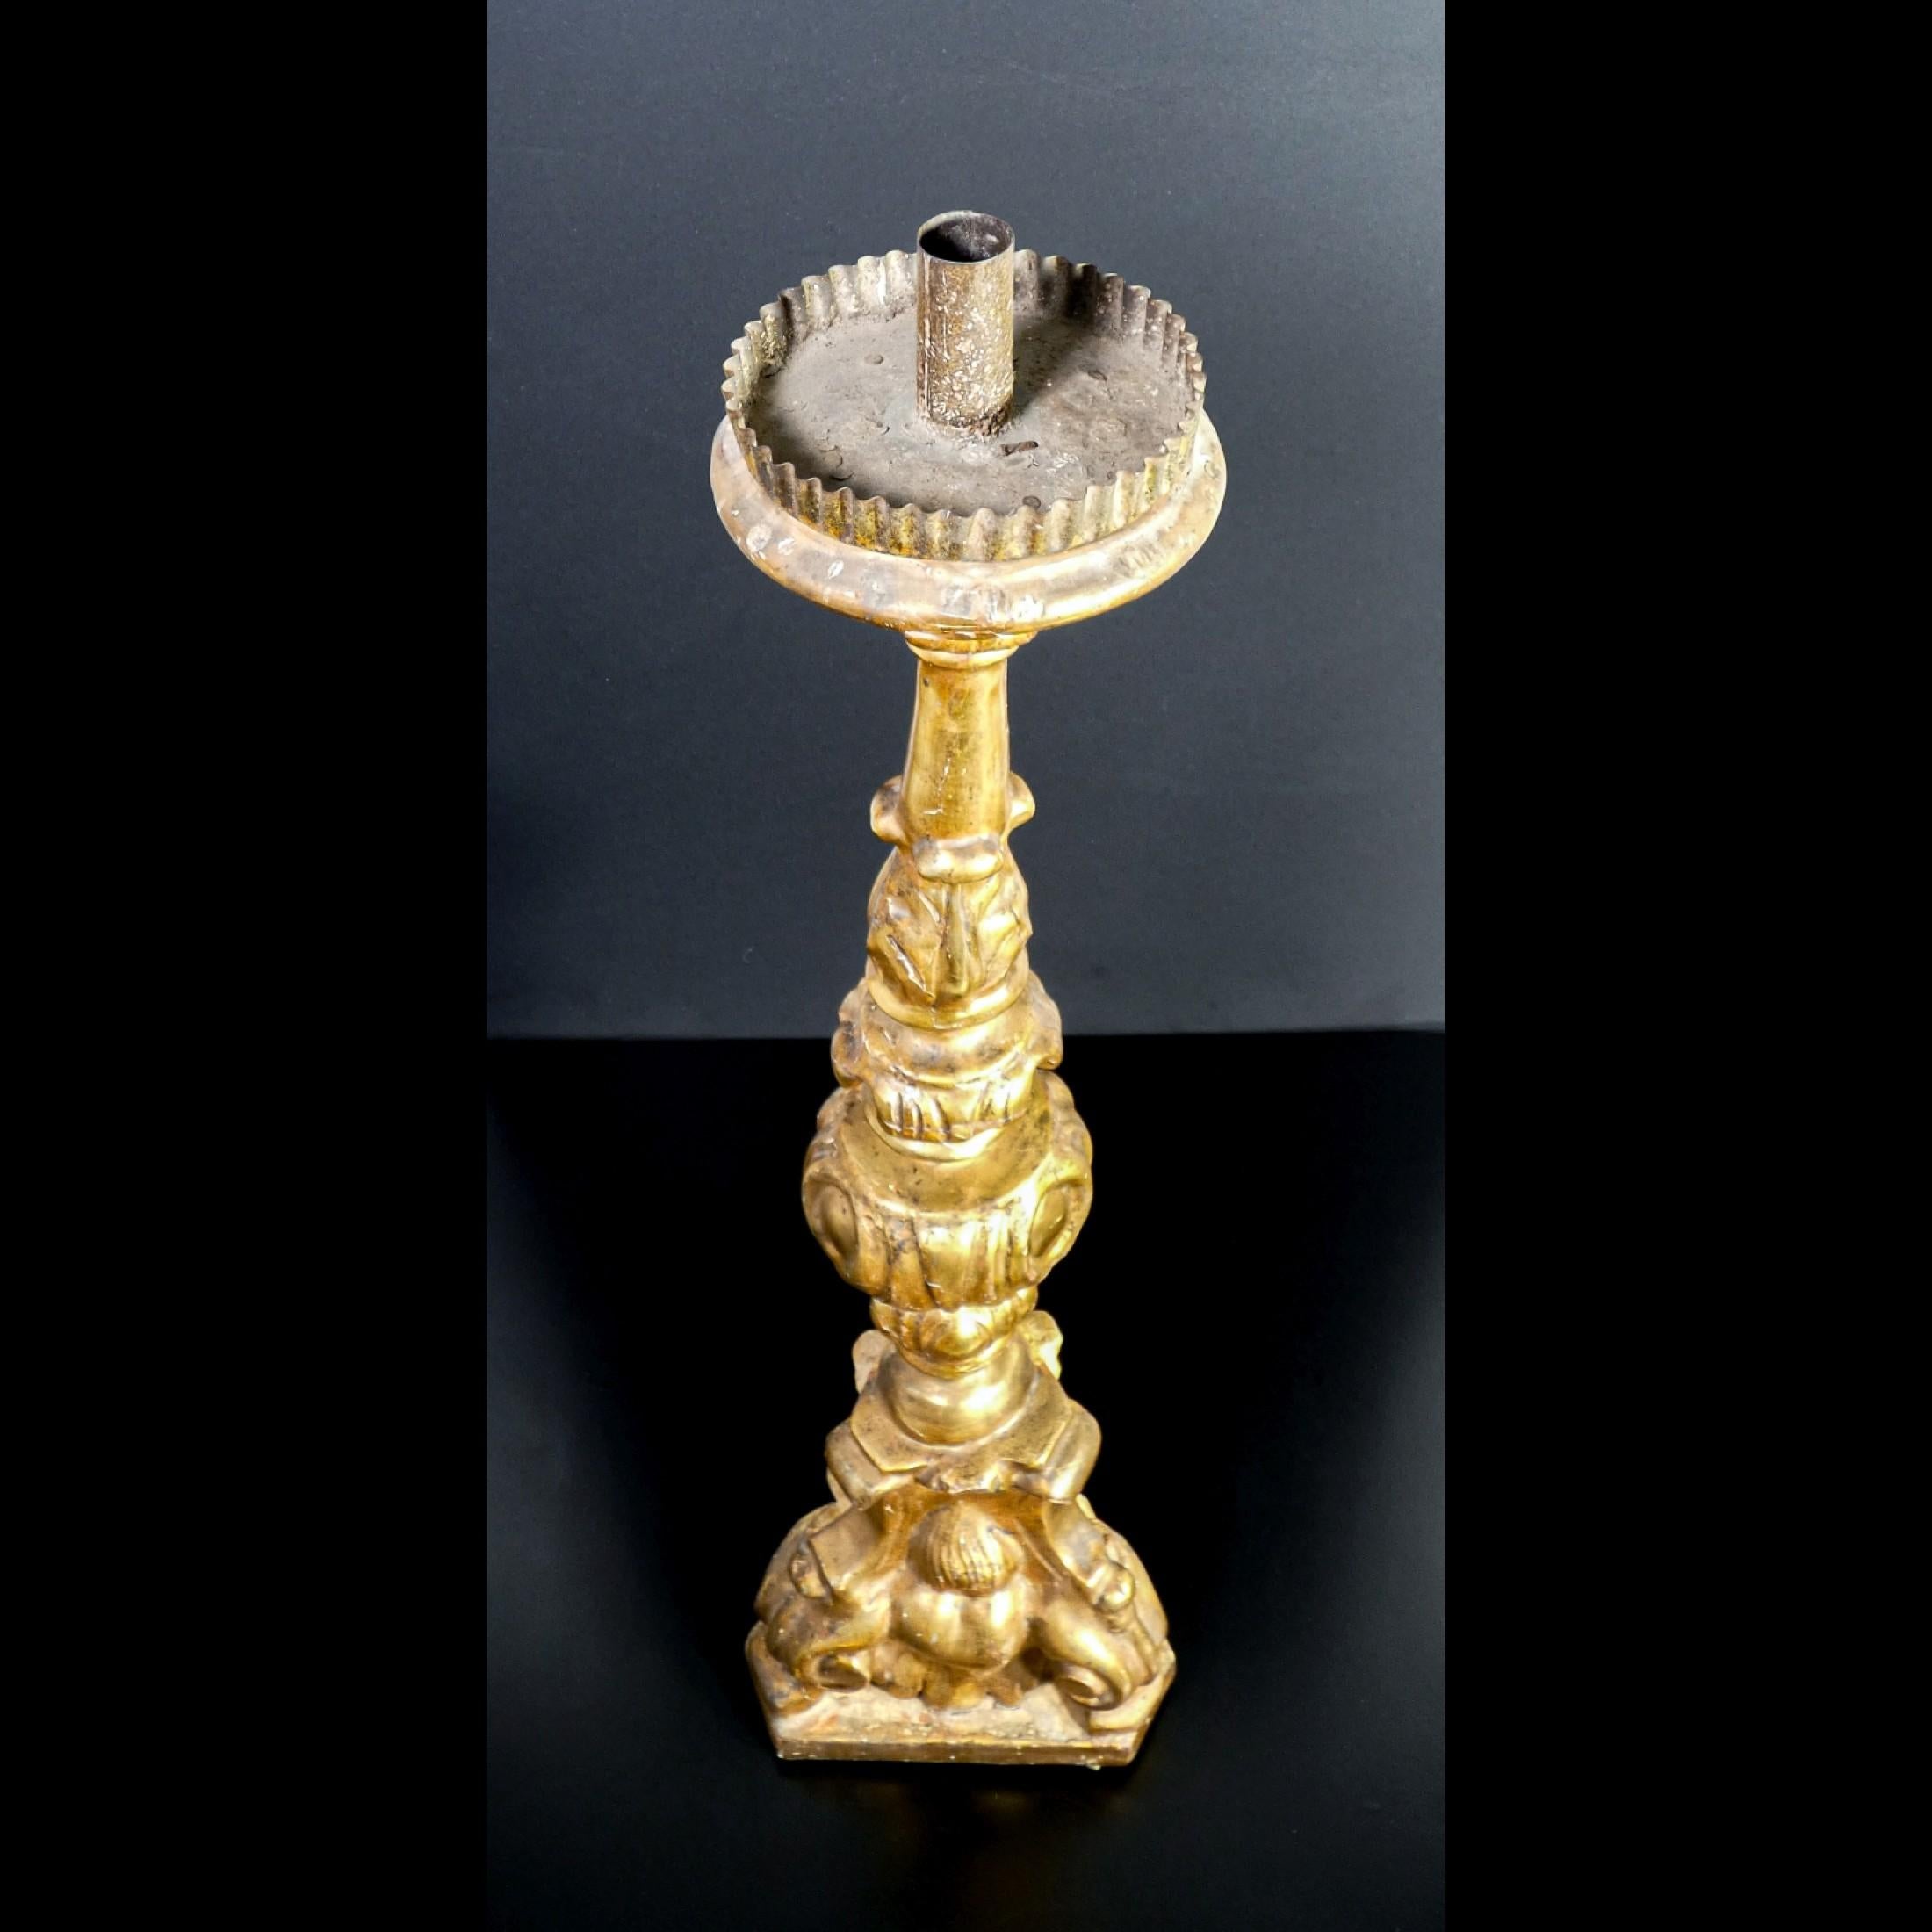 Italian Original Louis XV Candlestick, in Carved Wood, 'Mecca' Gilded, Italy, 1730-1740